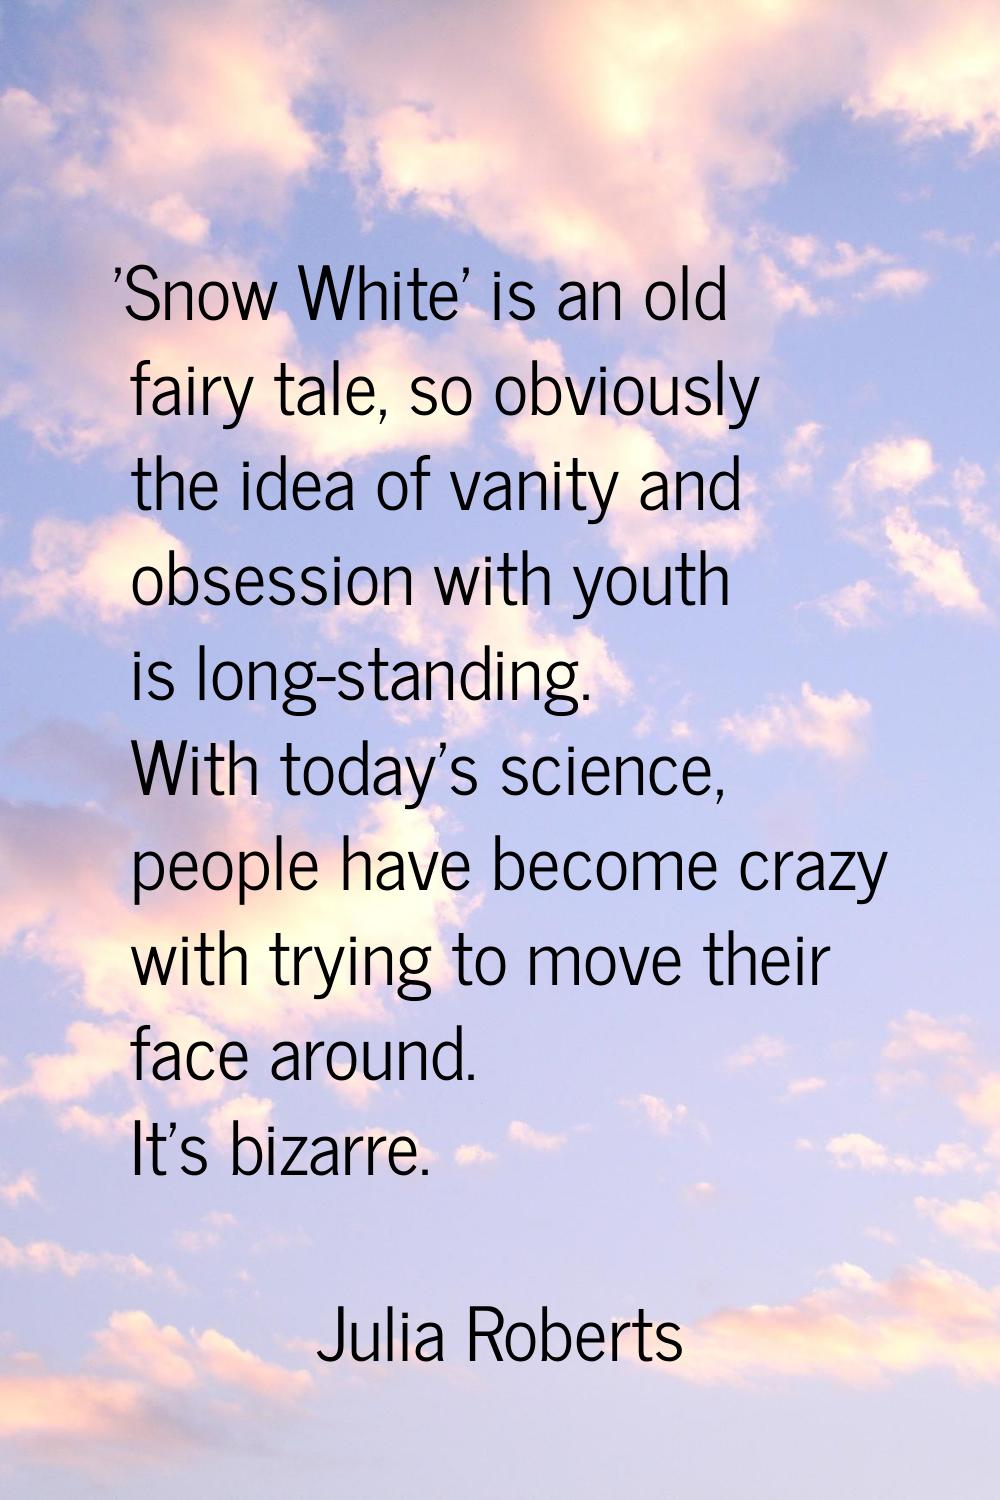 'Snow White' is an old fairy tale, so obviously the idea of vanity and obsession with youth is long